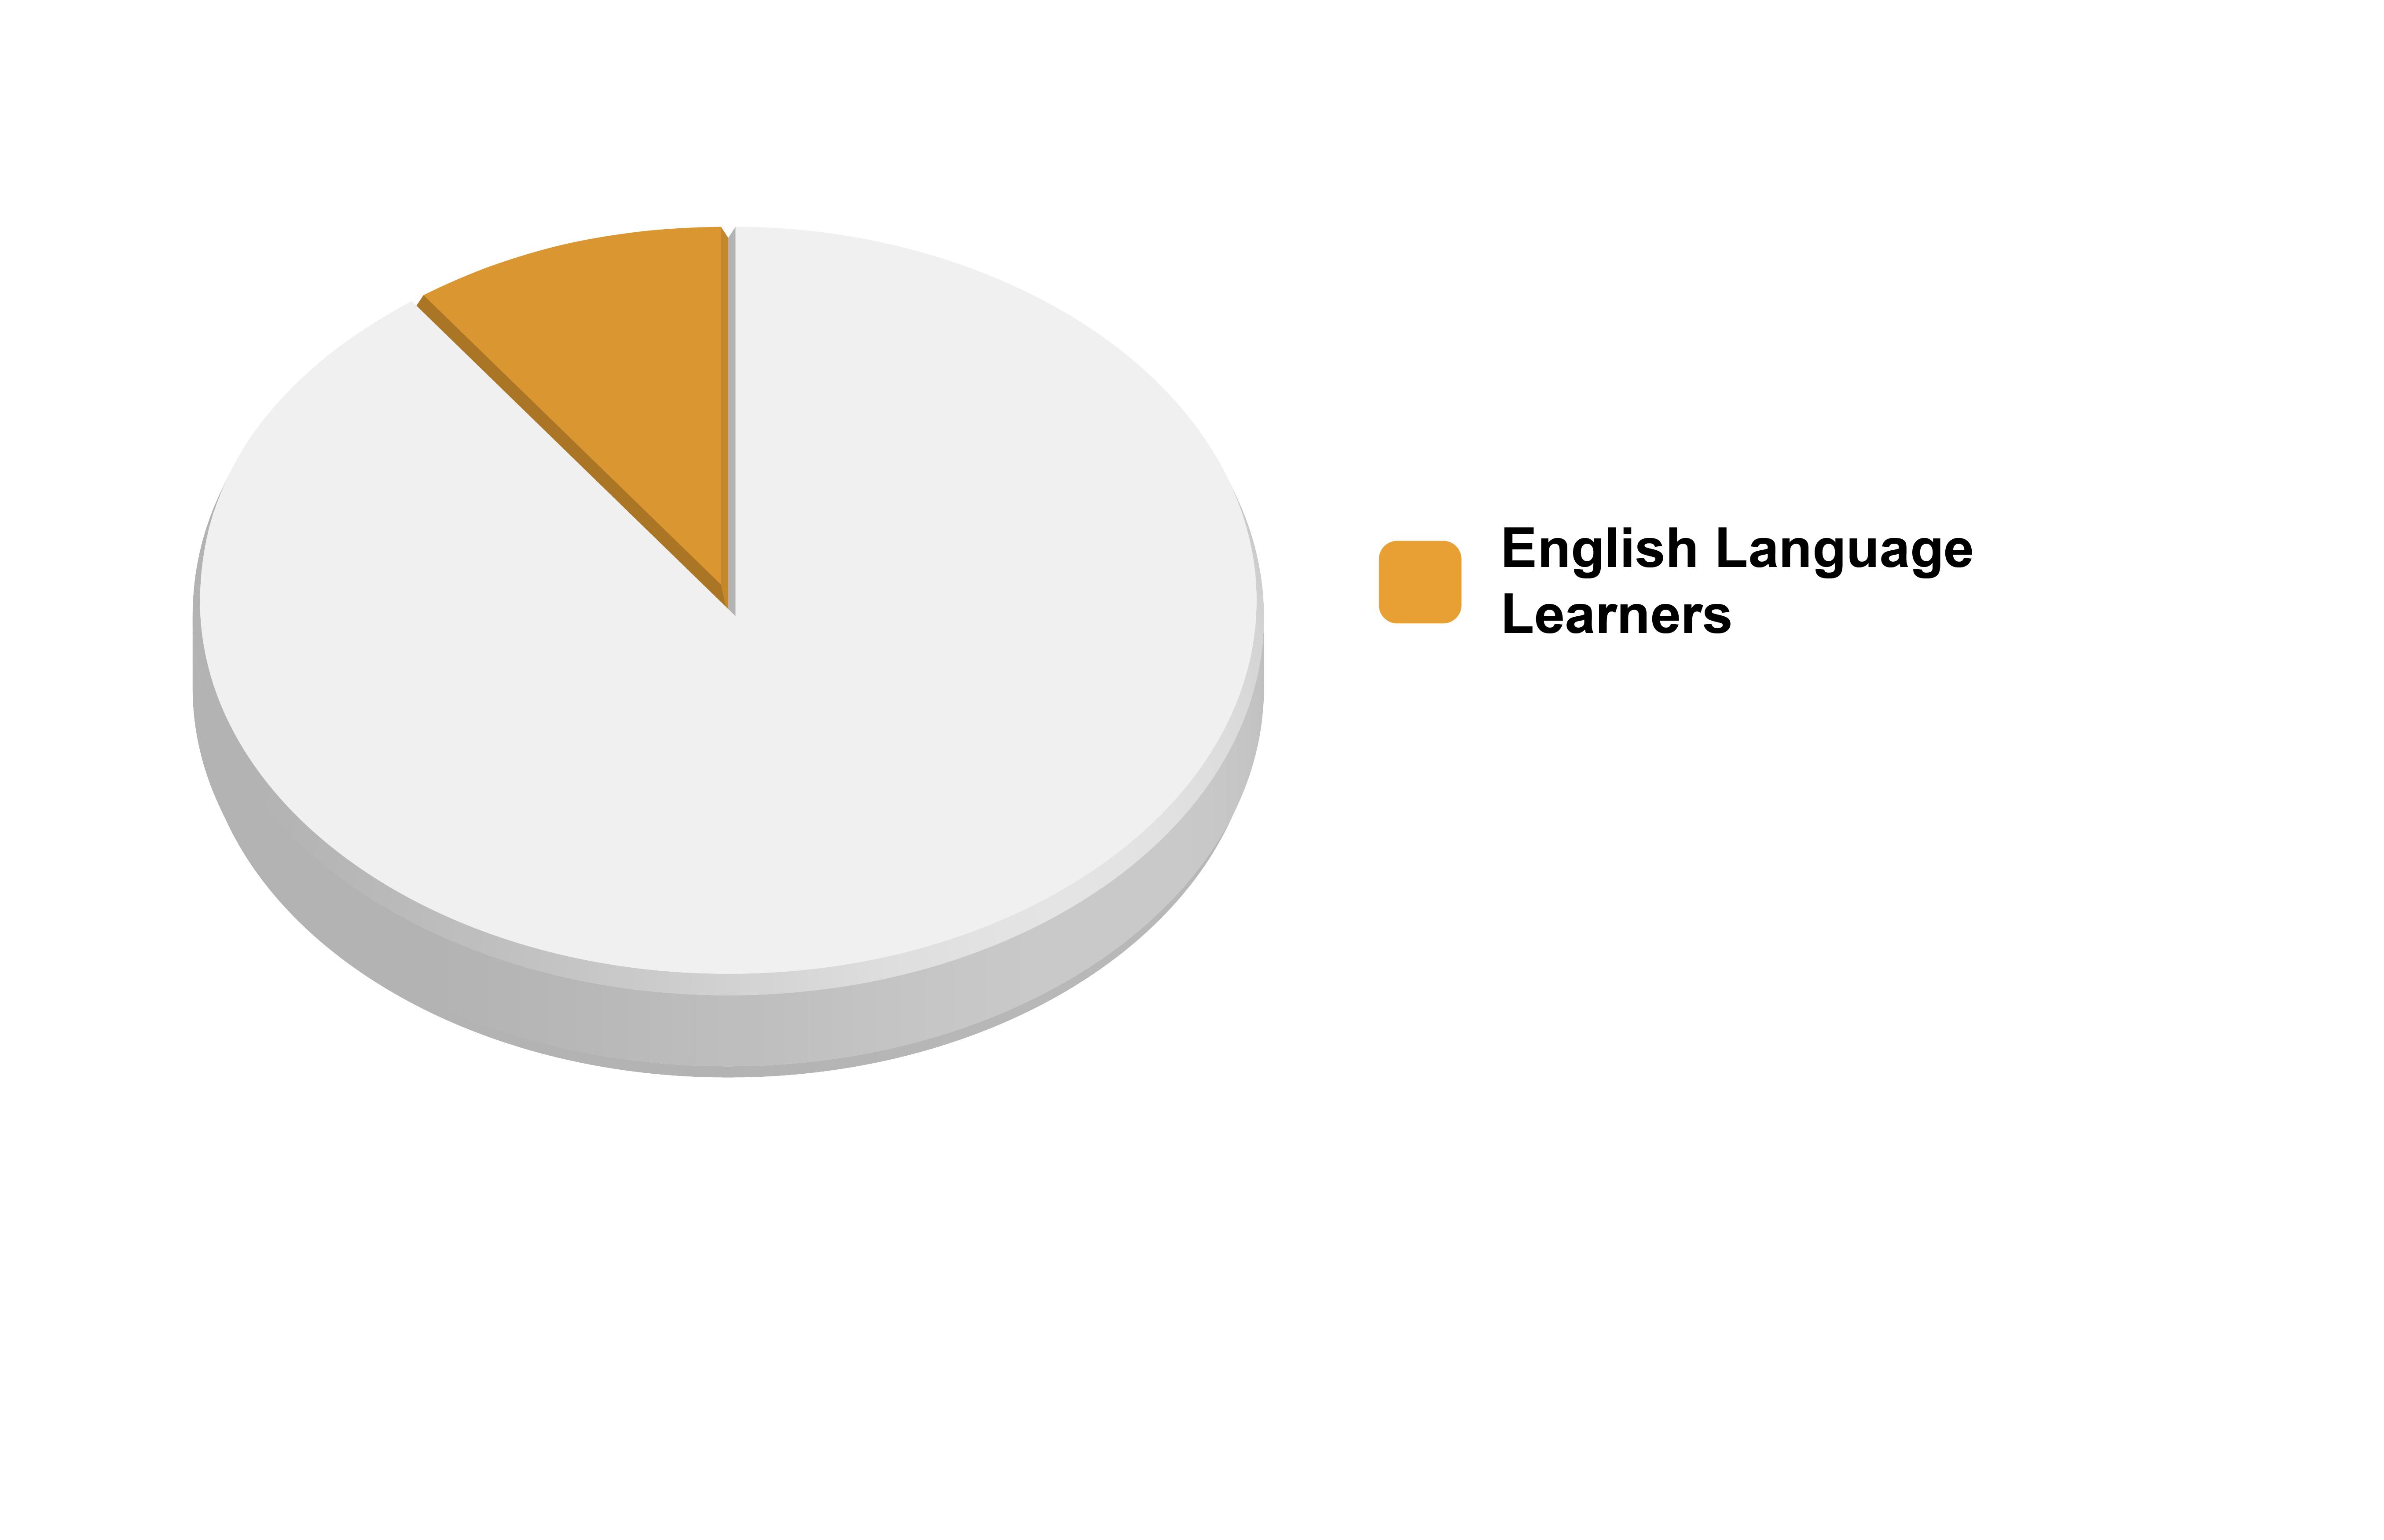 Pie chart showing the percentage of district students who are English Language Learners